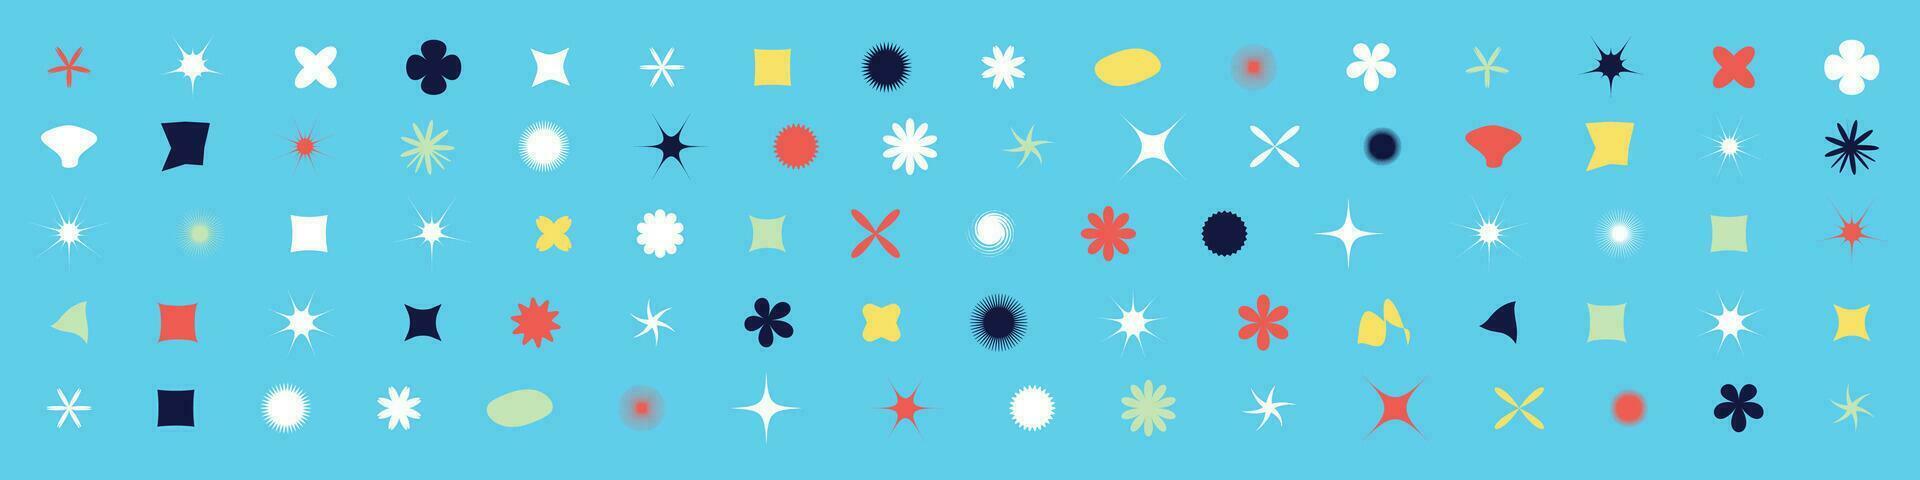 Geometric shapes, star symbols, flower design in Y2K retro style. Abstract graphic stickers and figures, icons. Flat vector illustrations isolated background.